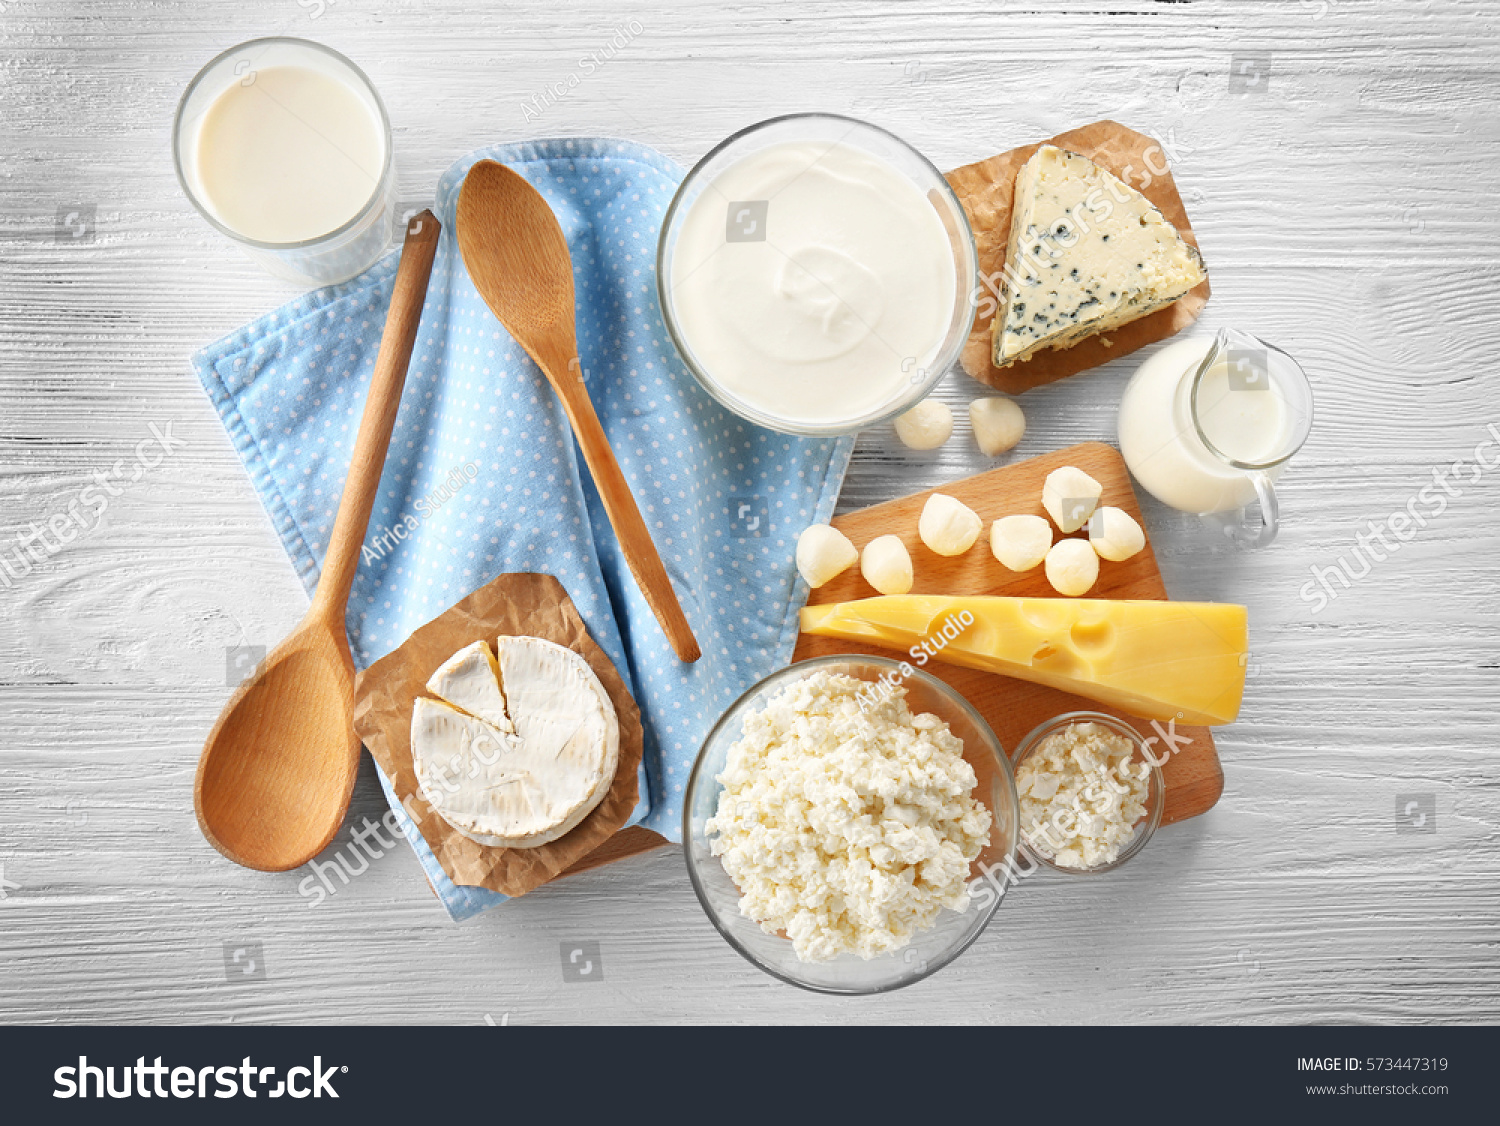 Different types of dairy products on wooden background #573447319